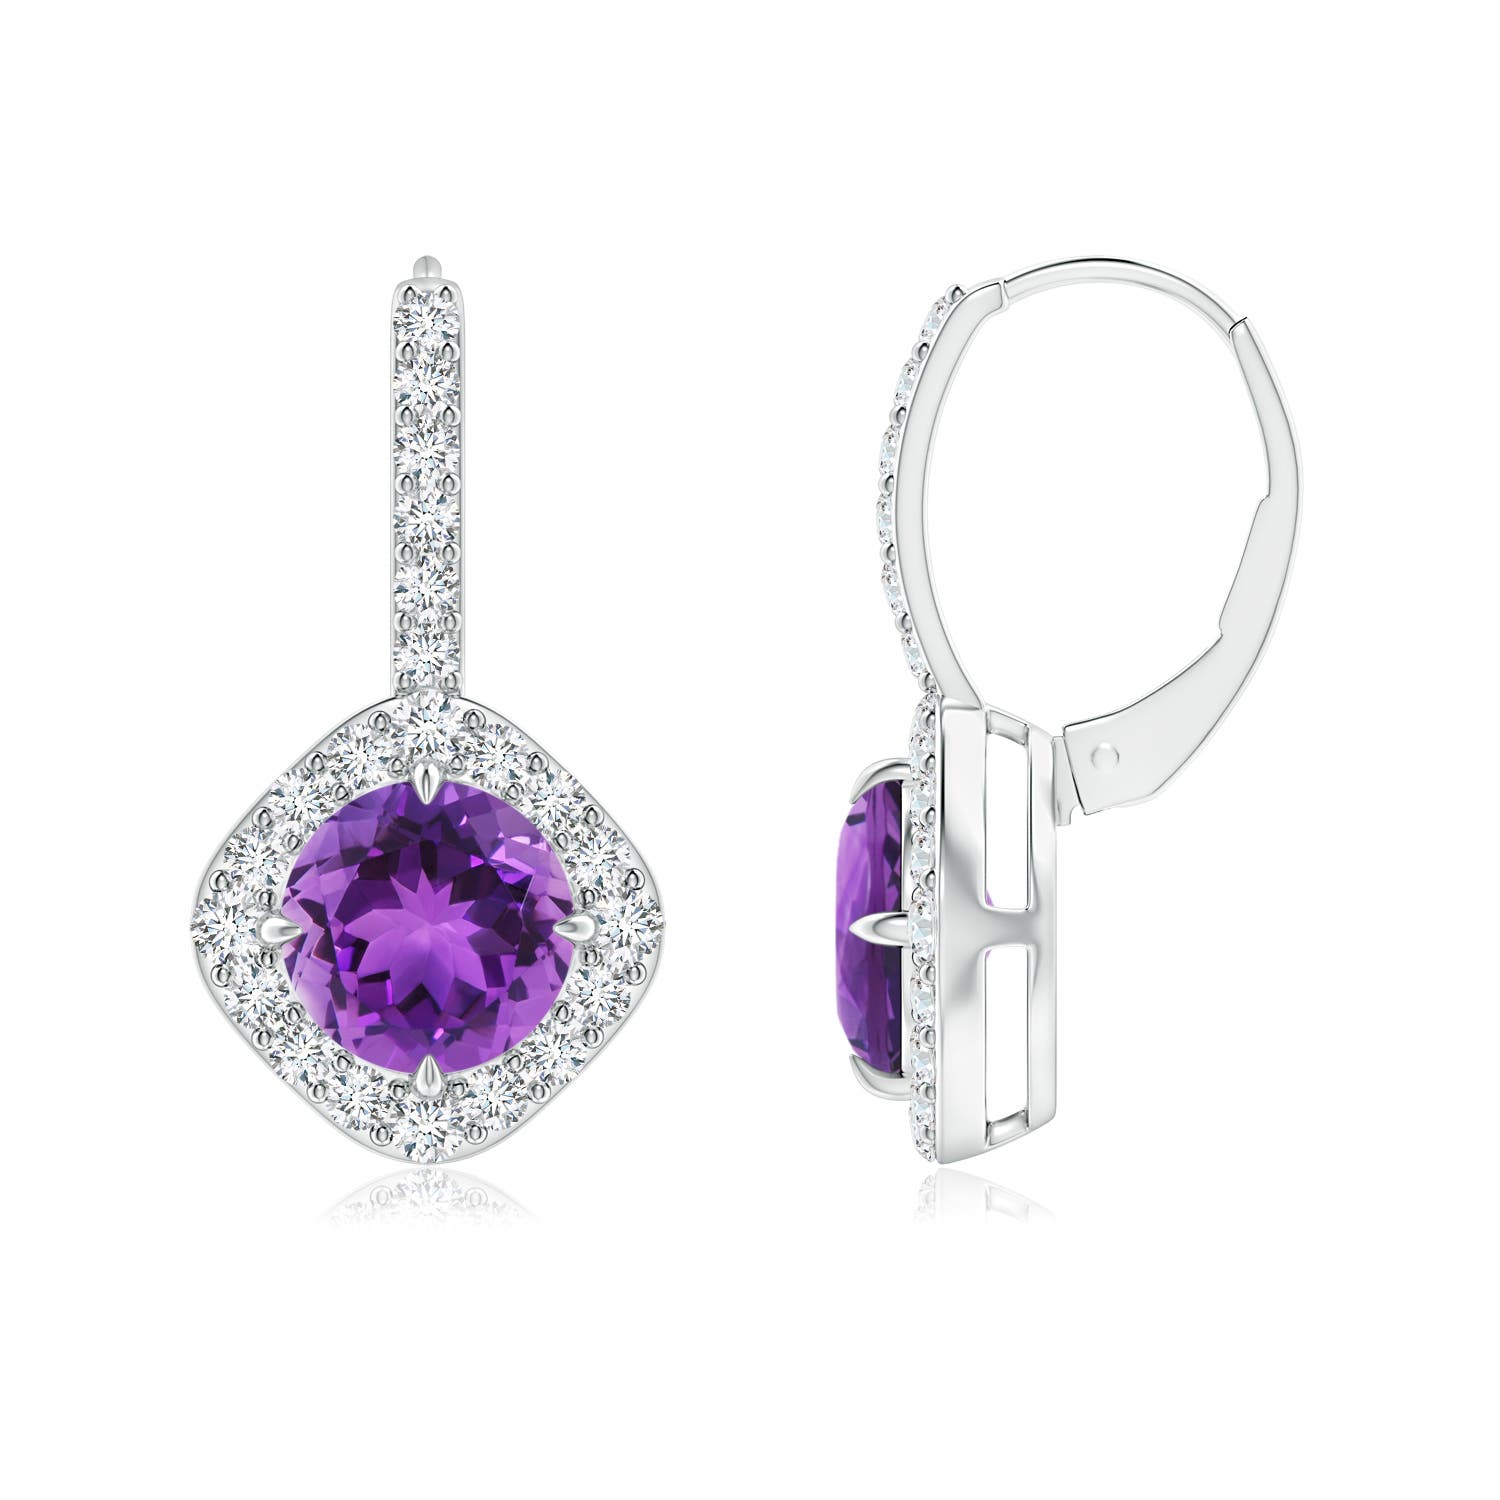 AAA - Amethyst / 2.85 CT / 14 KT White Gold